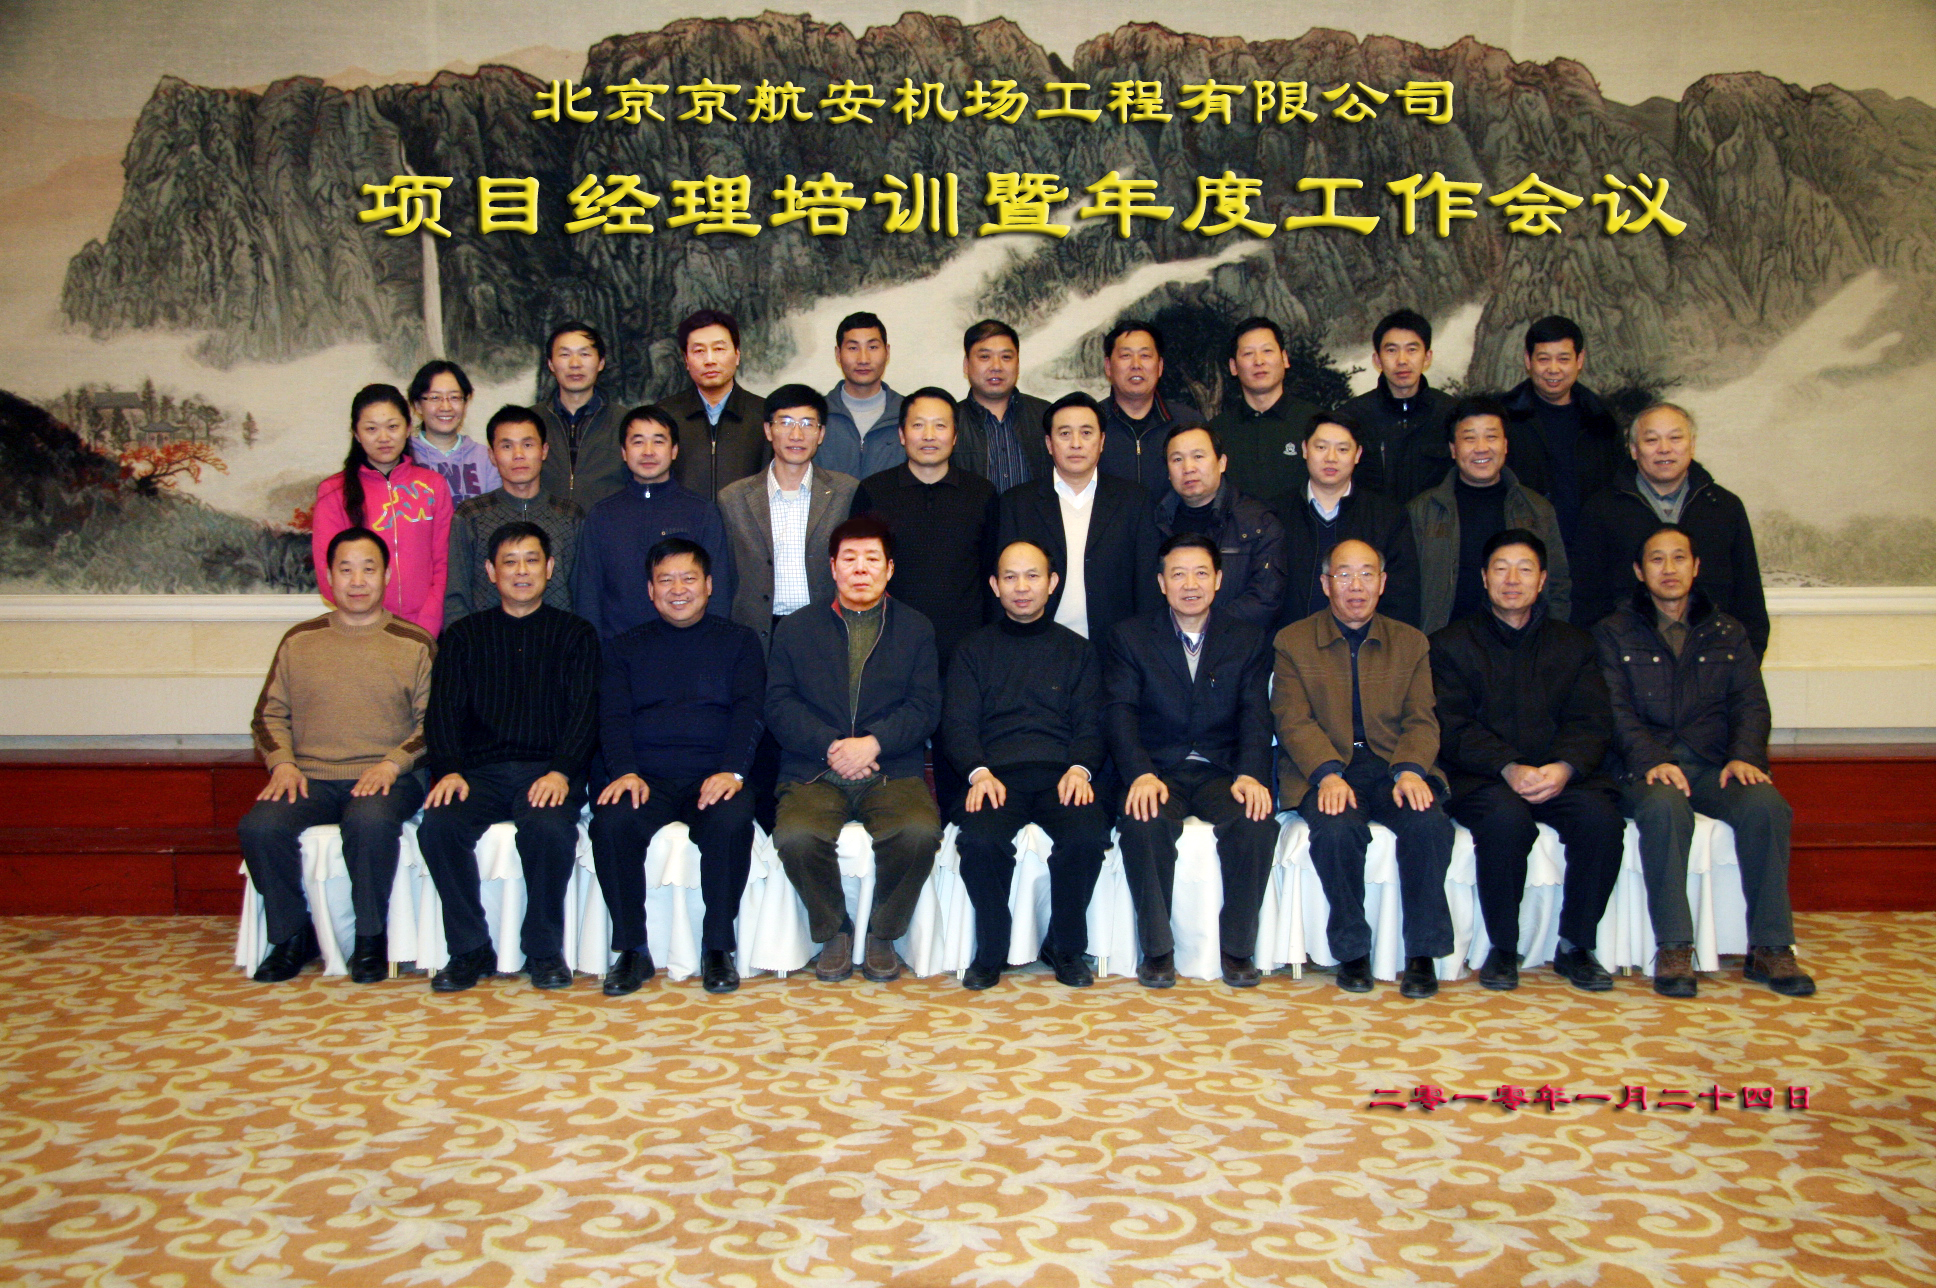 Group photo of 2010 annual meeting